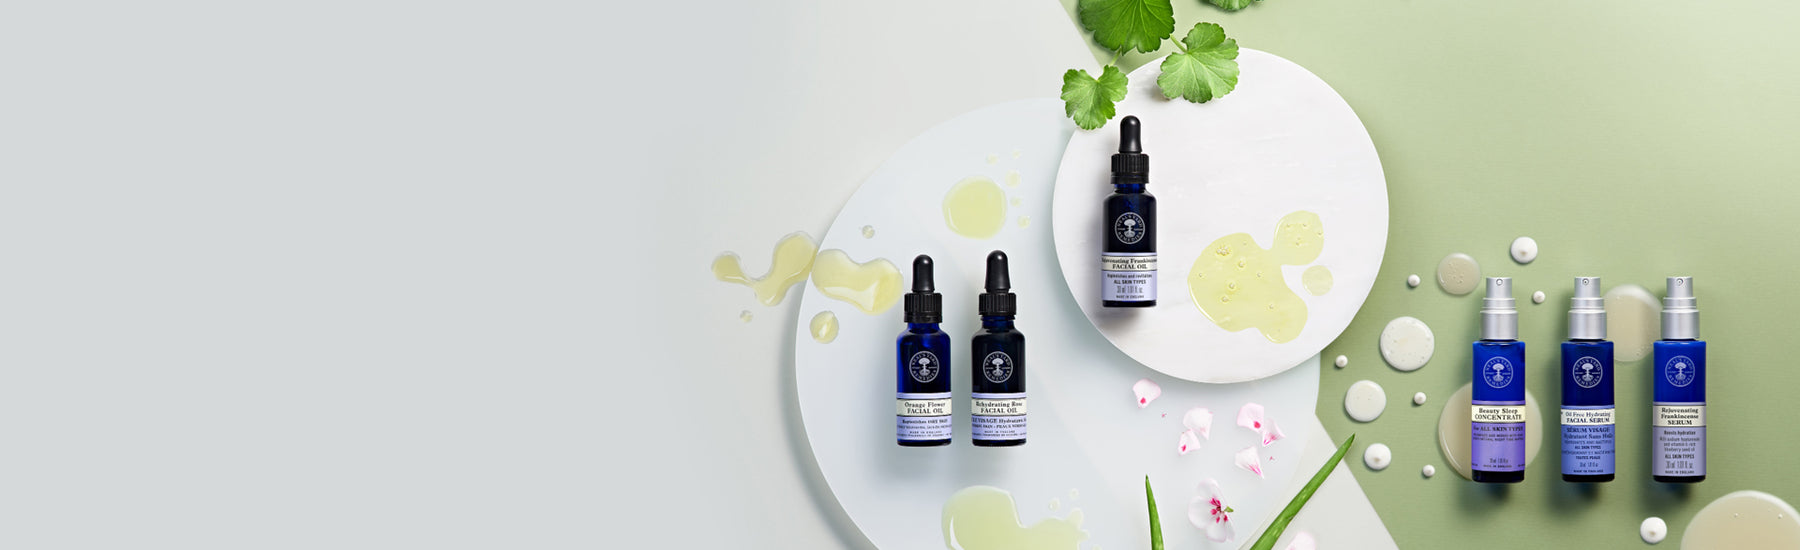 Picture displaying different facial oils and serums on green and white background by Neal's Yard Remedies